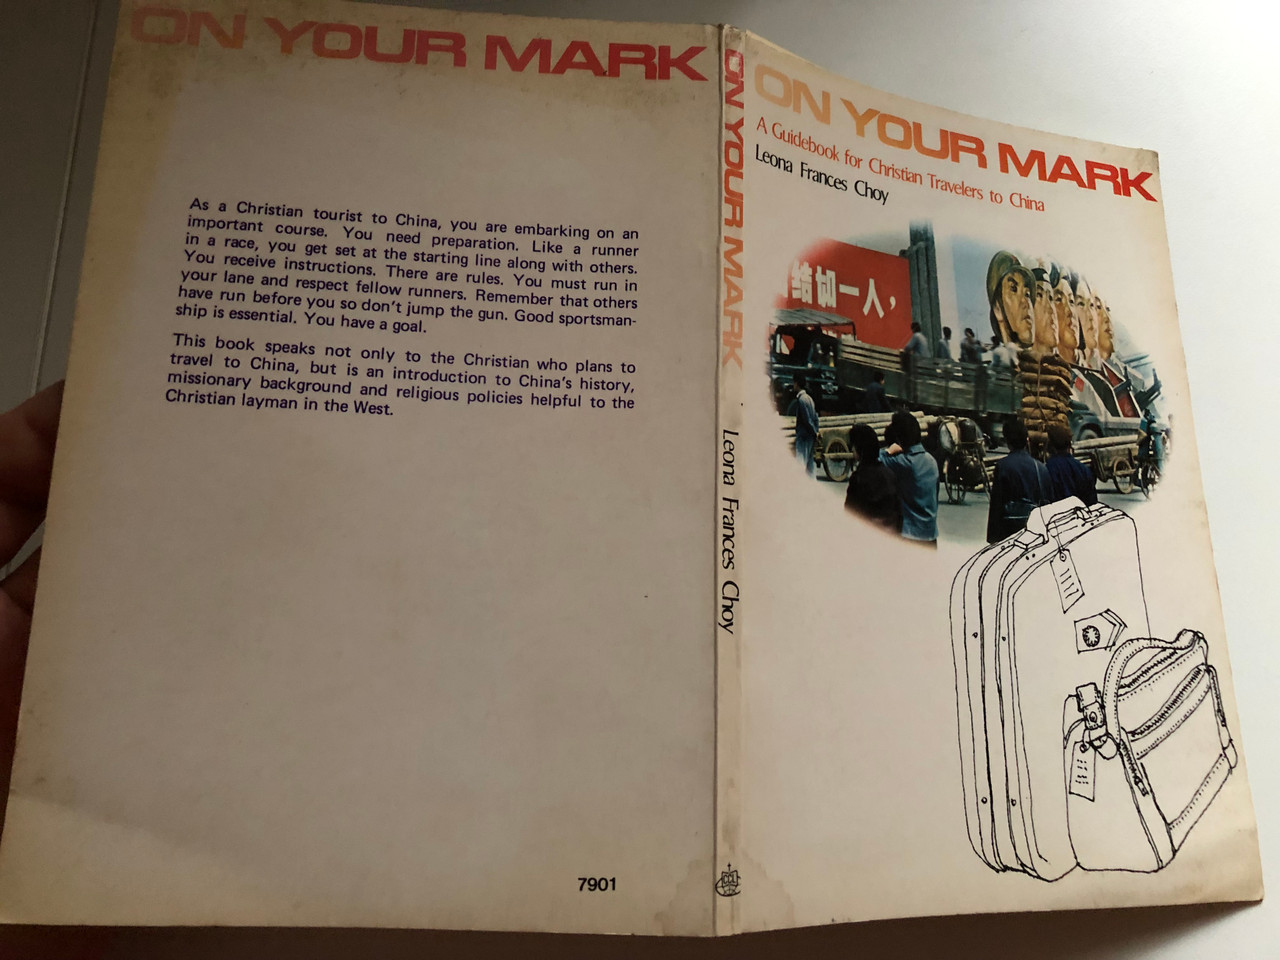 On_Your_Mark_by_Leona_Frances_Choy_A_Guidebook_for_Christian_Travelers_to_China_Introduction_to_Chinas_history_Missionary_background_Published_by_permission_of_Mrs._L_14__02799.1690605268.1280.1280.JPG (1280×960)